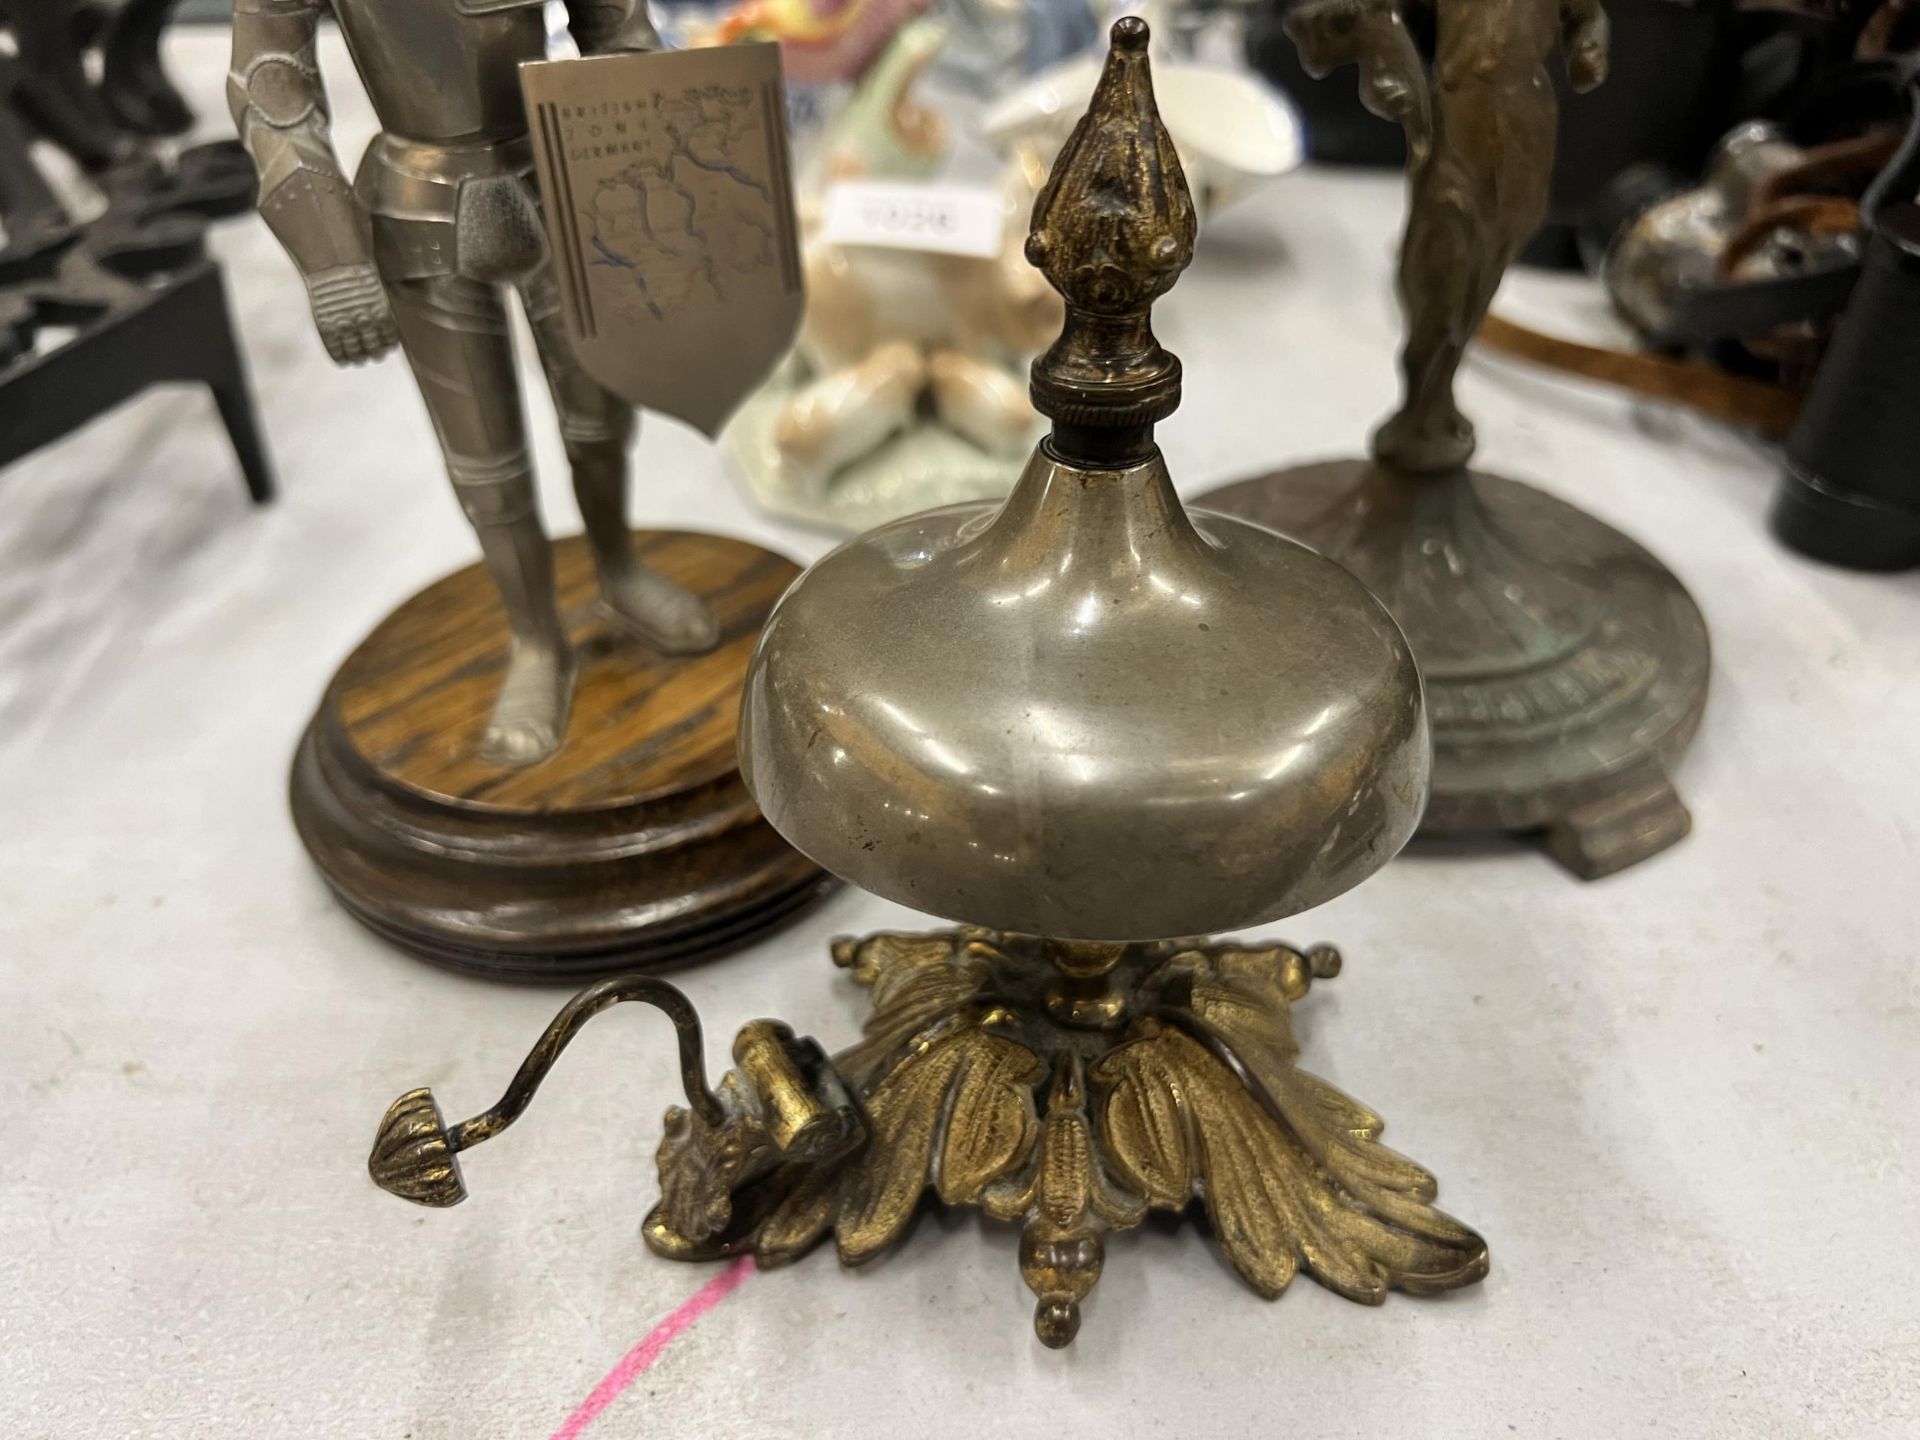 A VINTAGE TABLE LIGHTER IN THE SHAPE OF A KNIGHT, AN ORNATE BRASS CANDLE HOLDER AND A BRASS - Image 4 of 4